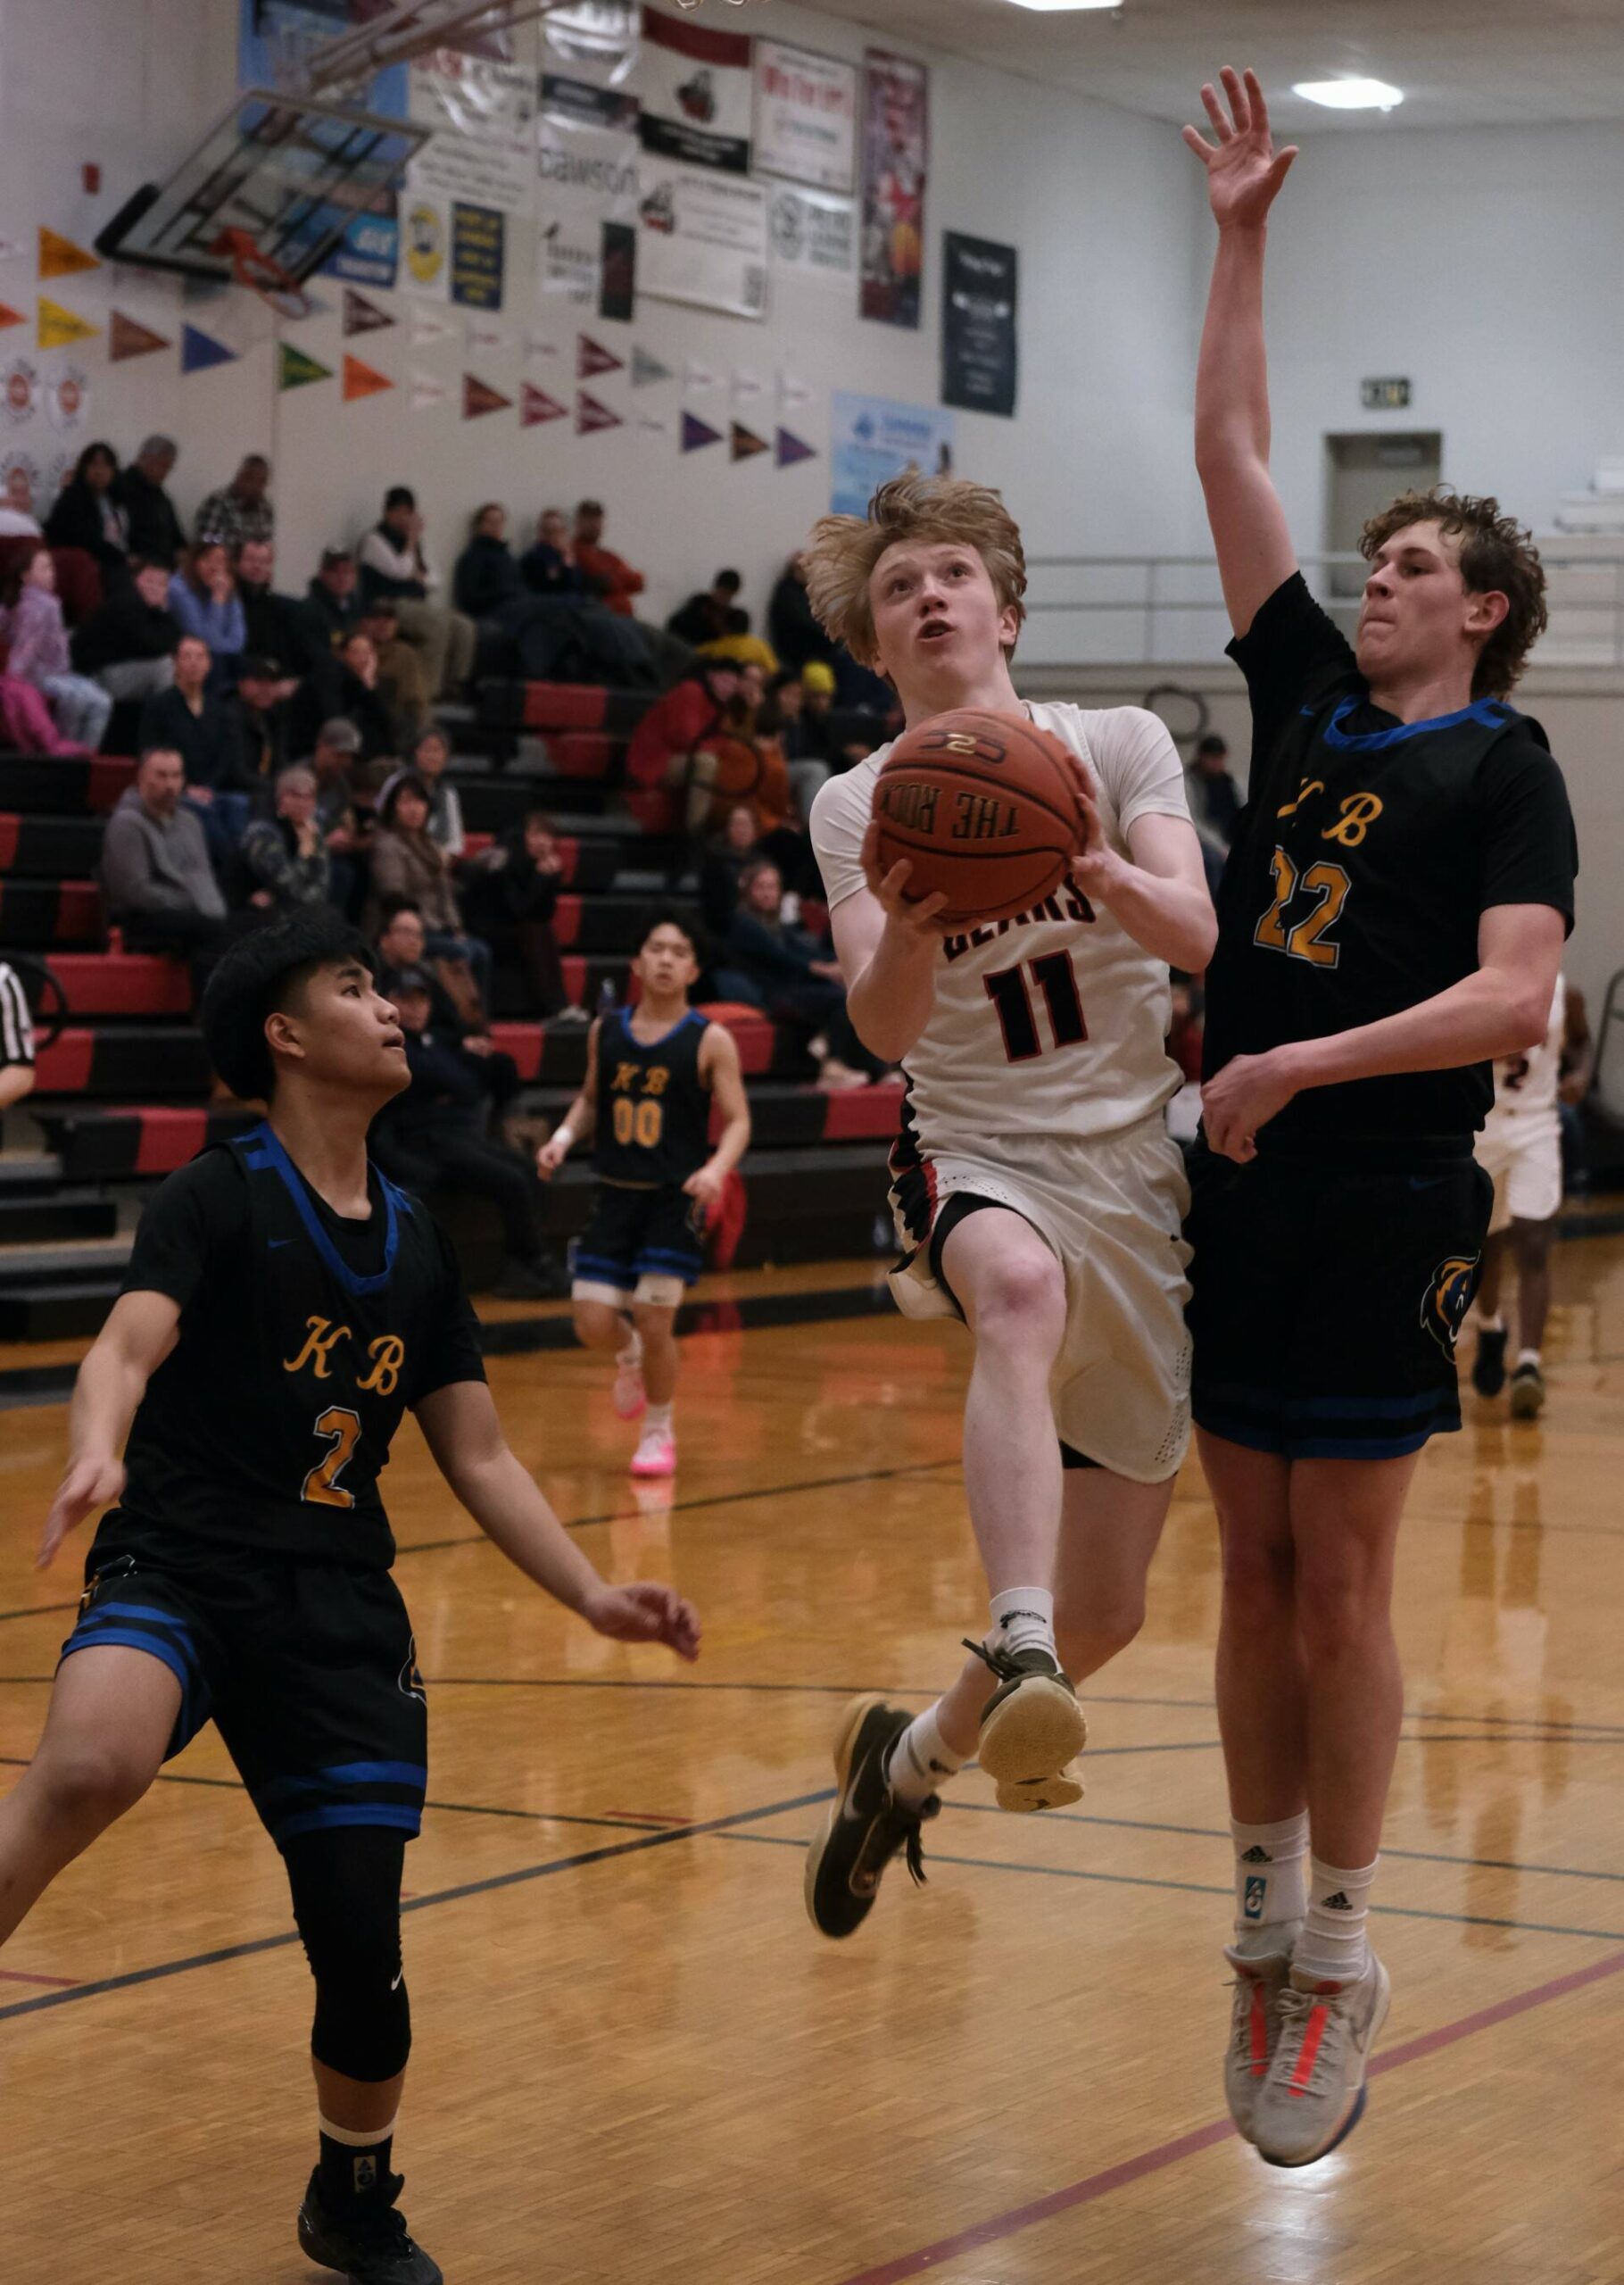 Juneau-Douglas High School: Yadaa.at Kalé senior Sean Oliver (11) scoops a shot against Kodiak junior Liam Danelski (22) during the Crimson Bears 75-50 win over the Bears on Saturday at the George Houston Gymnasium. (Klas Stolpe/For the Juneau Empire)